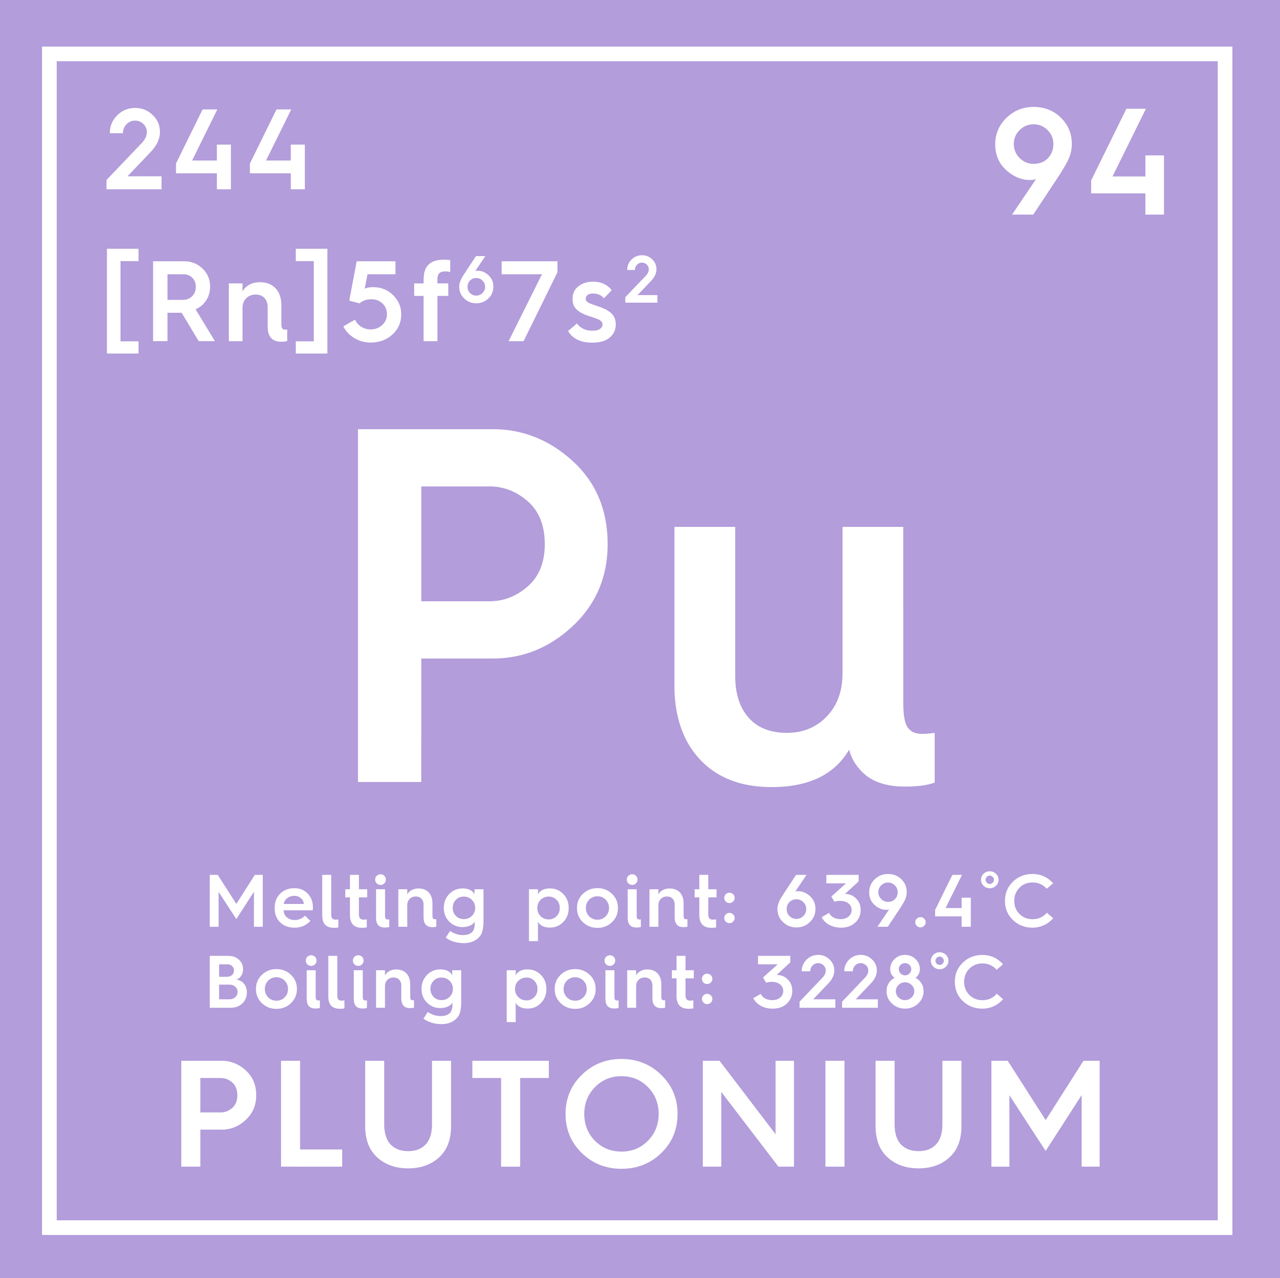 synthetic elements on the periodic table